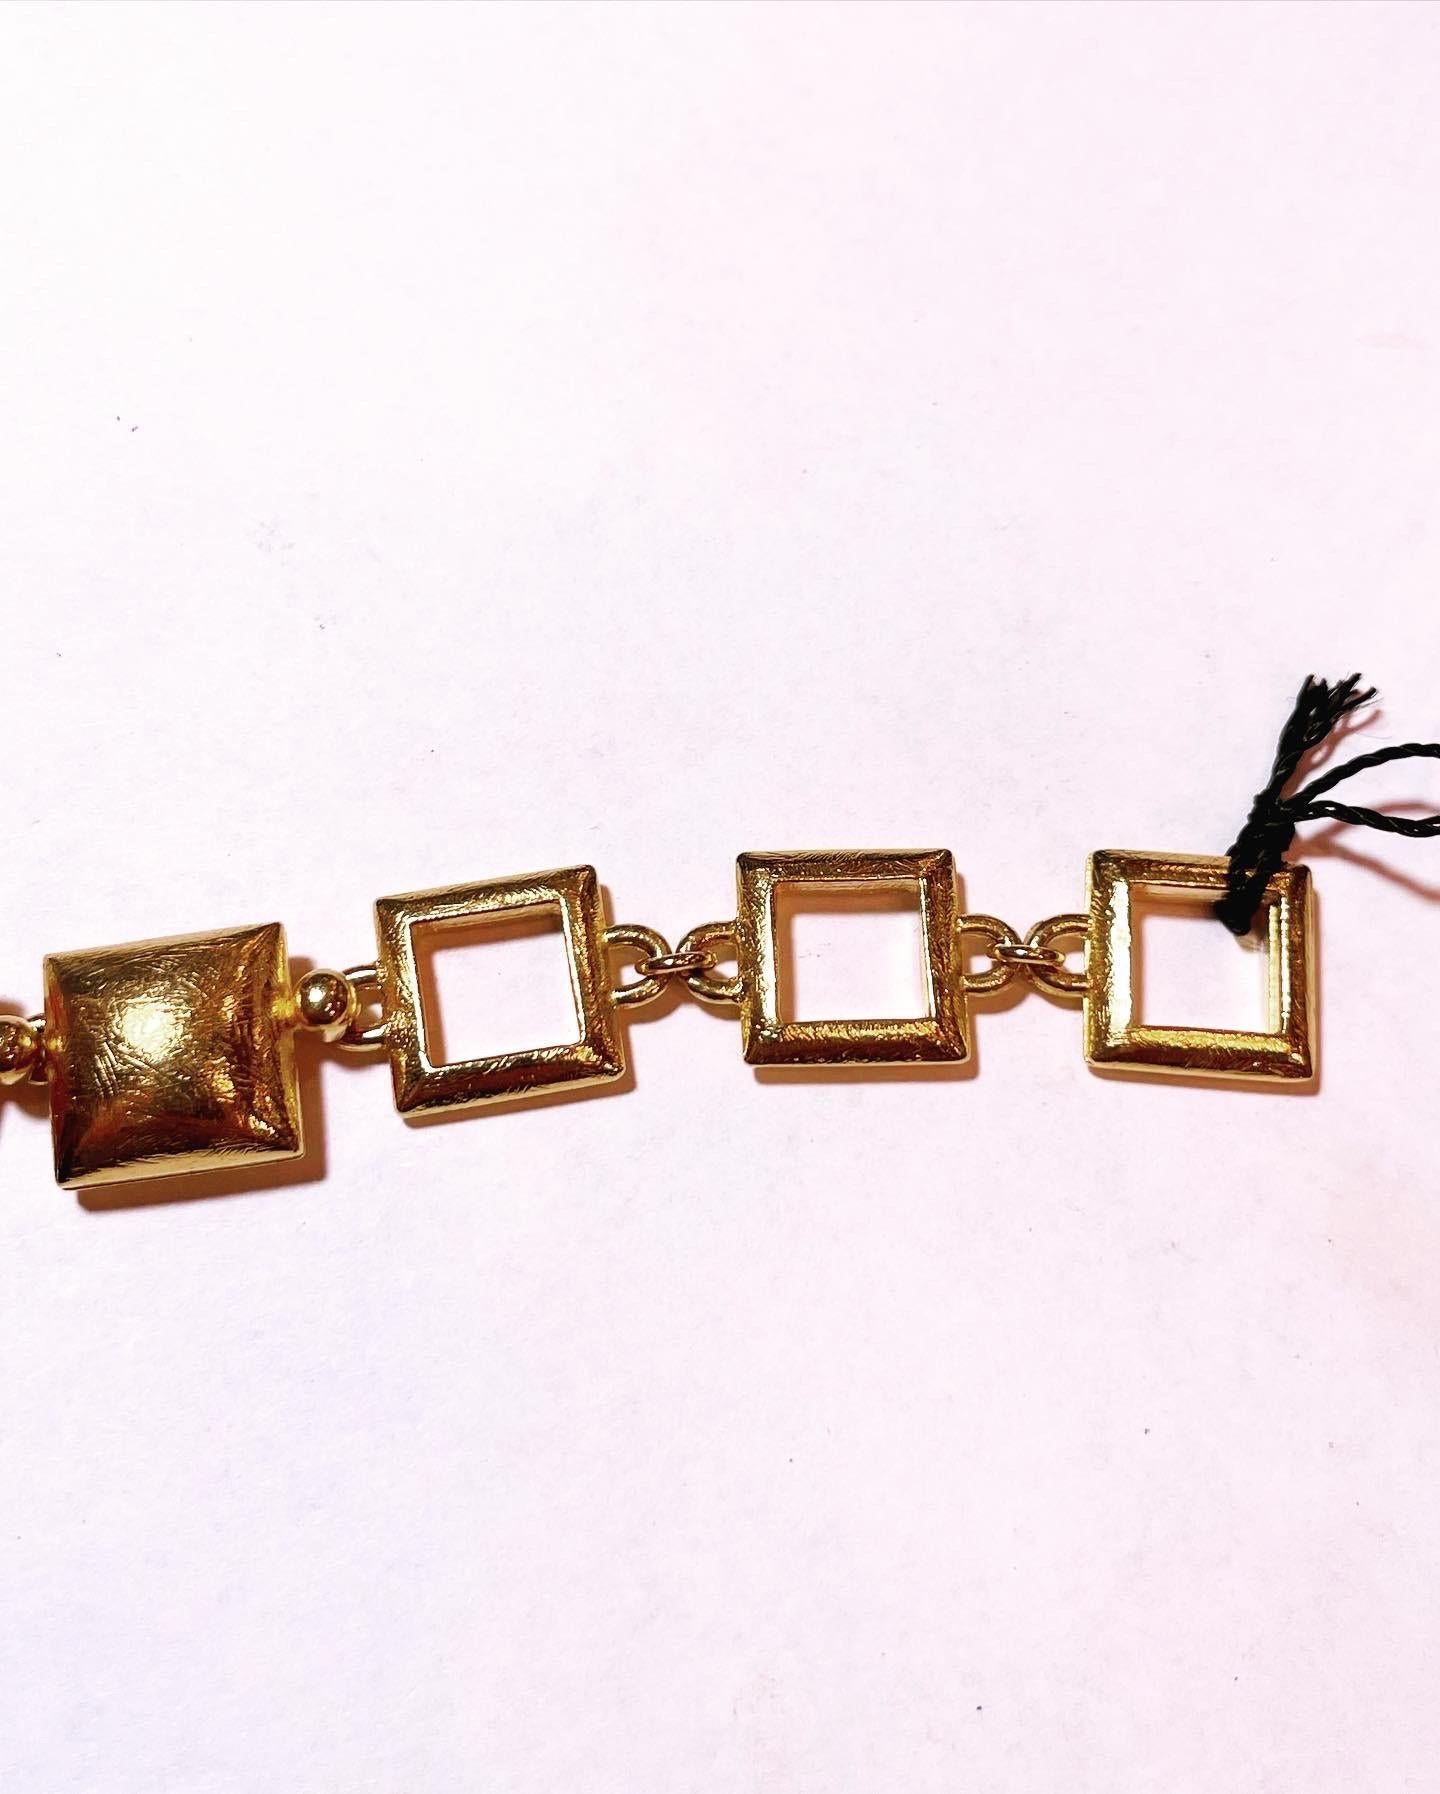 1980s YSL Yves Saint Laurent Vintage Gilt and Resin Fashion Never Used Necklace For Sale 1